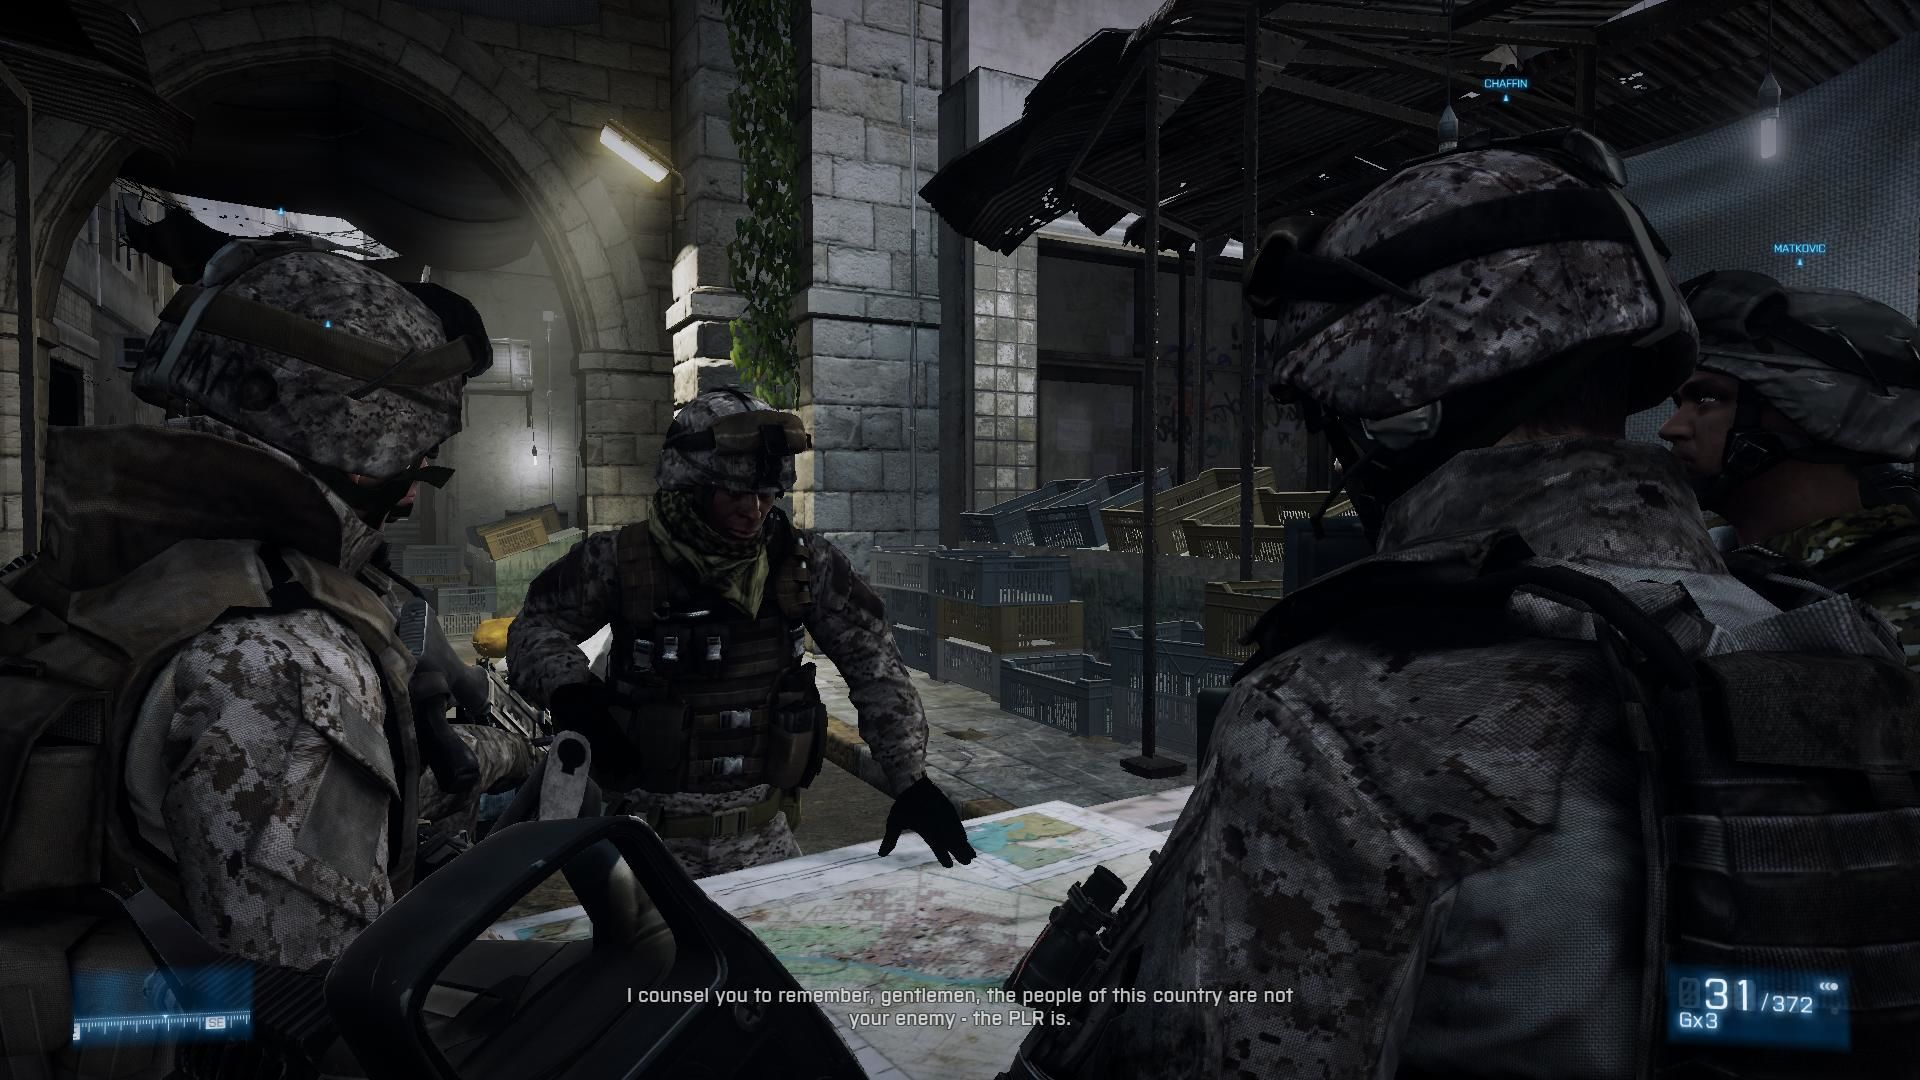 Four soldiers being briefed on mission while looking at a map.